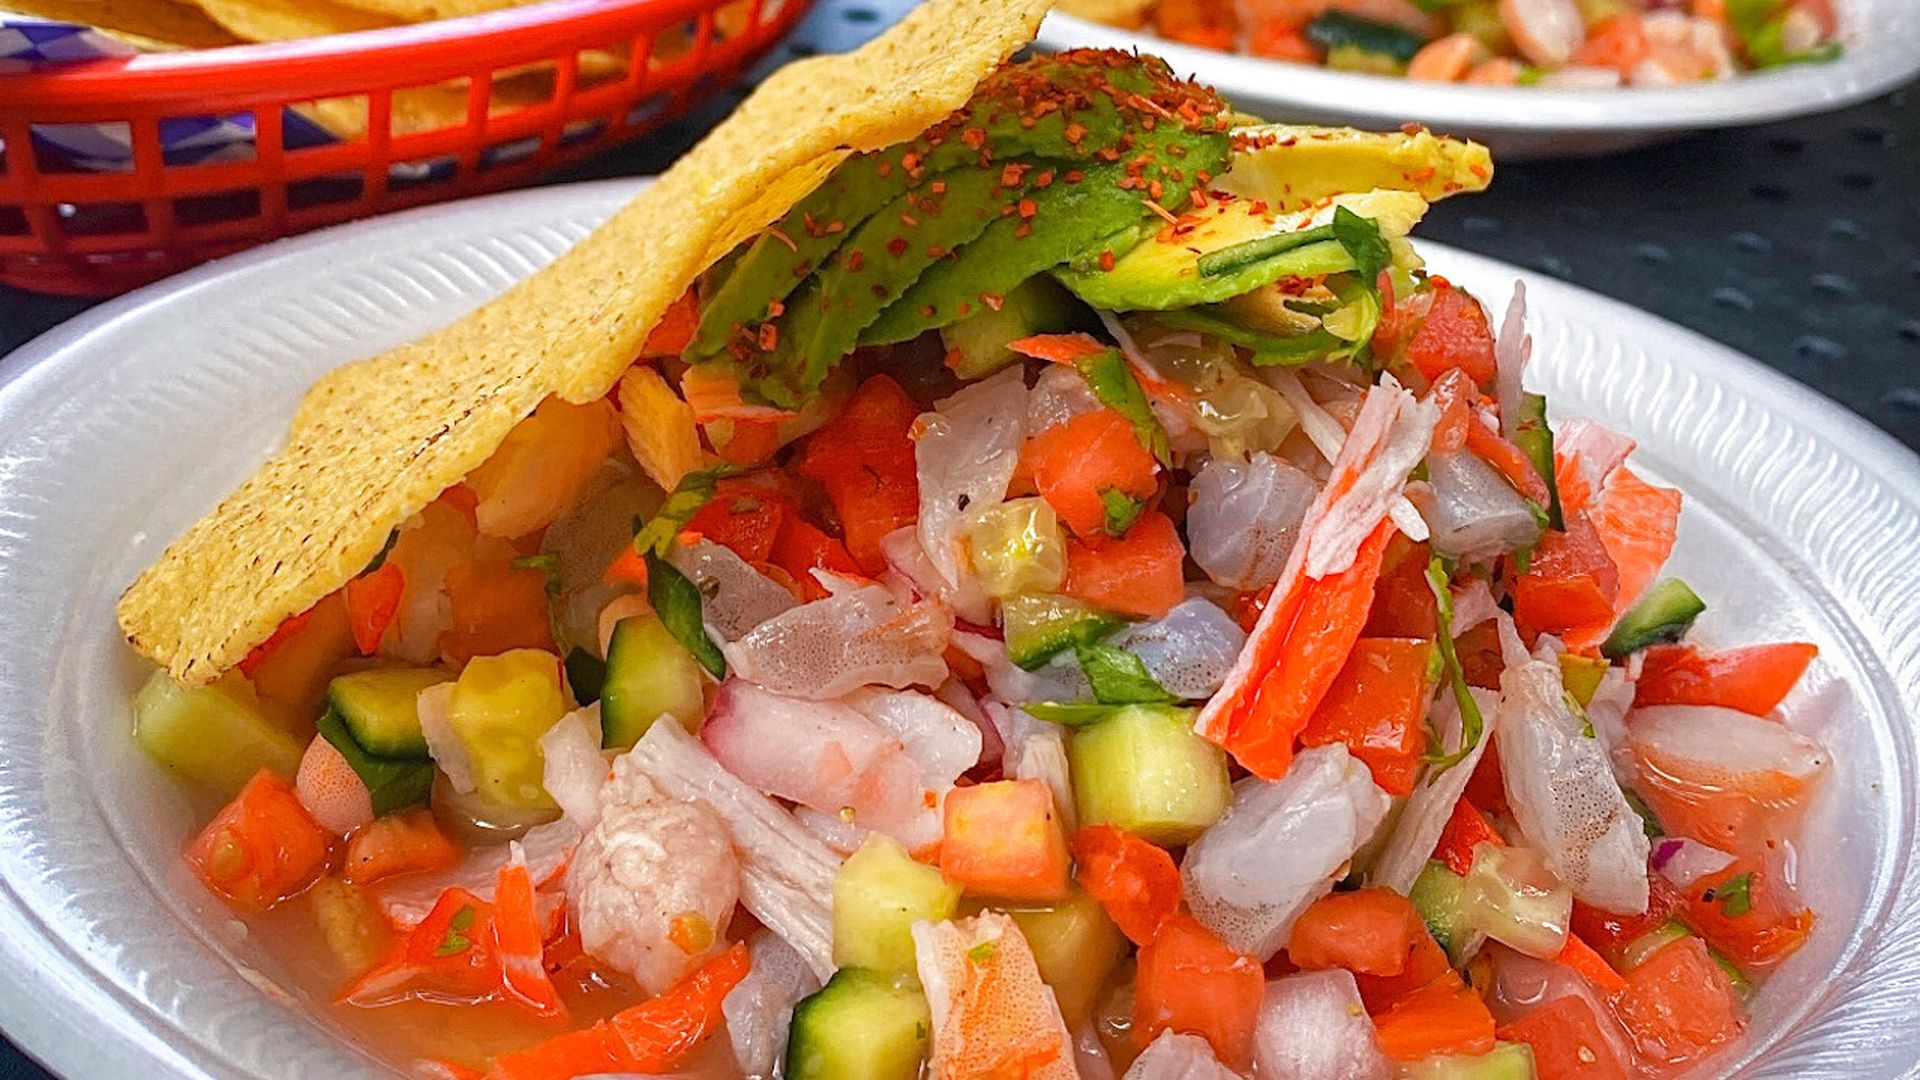 Two plates of fresh ceviche mix, topped with avocado and tortilla chips.